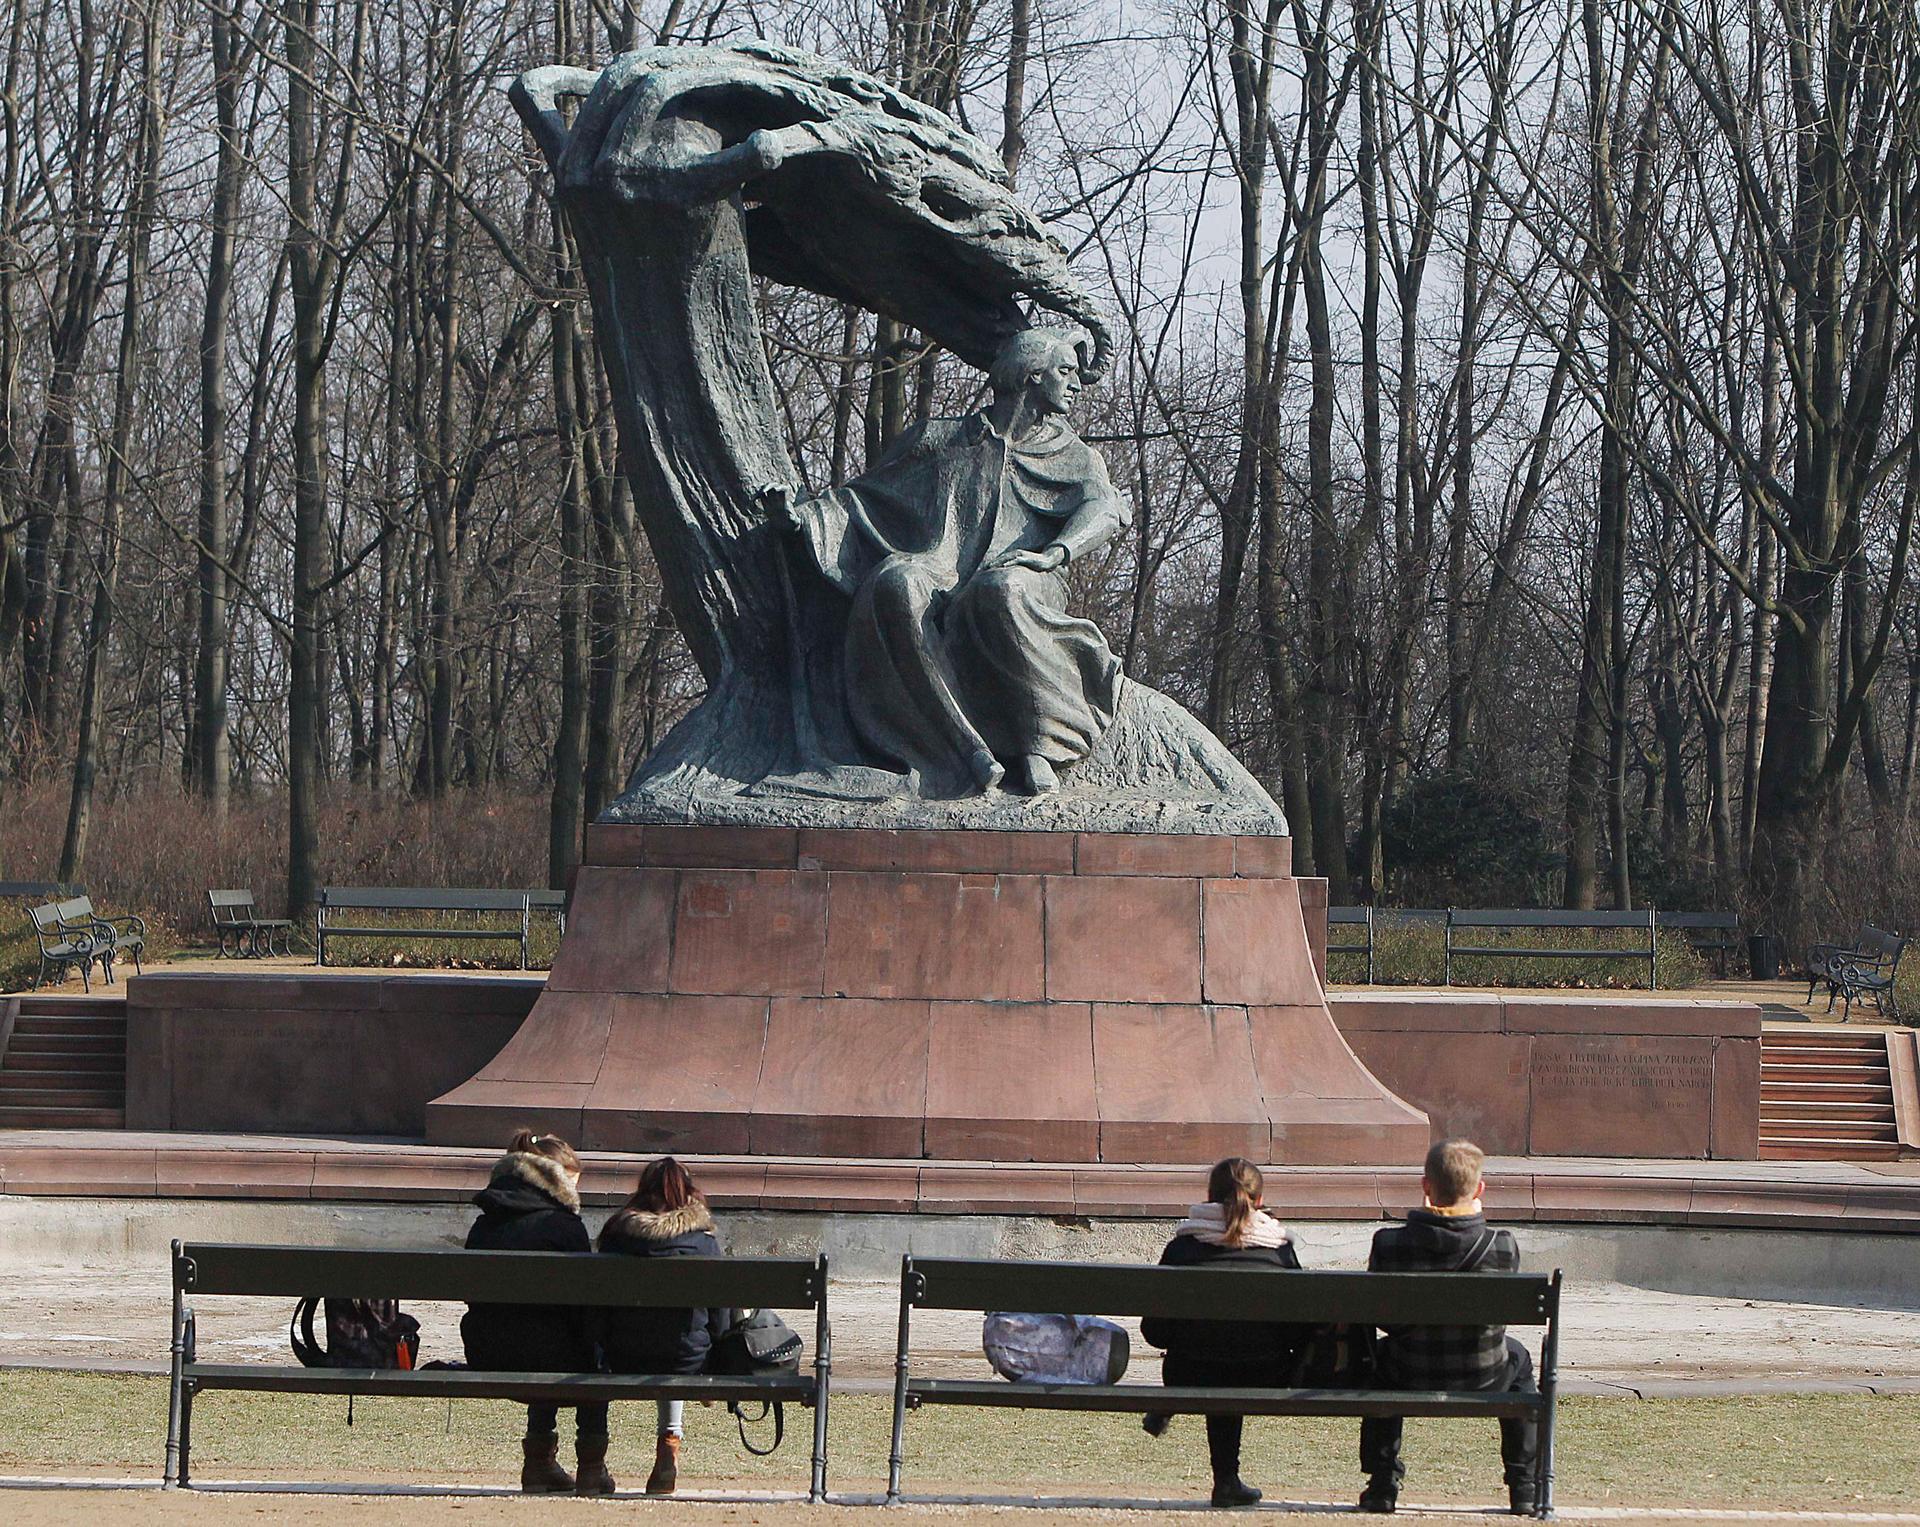 Warsaw residents enjoy an unusually warm and sunny day in the middle of winter next to the monument to Polish composer and pianist Frederic Chopin in the Lazienki Park in Warsaw, Poland, Friday, Feb 20, 2015.